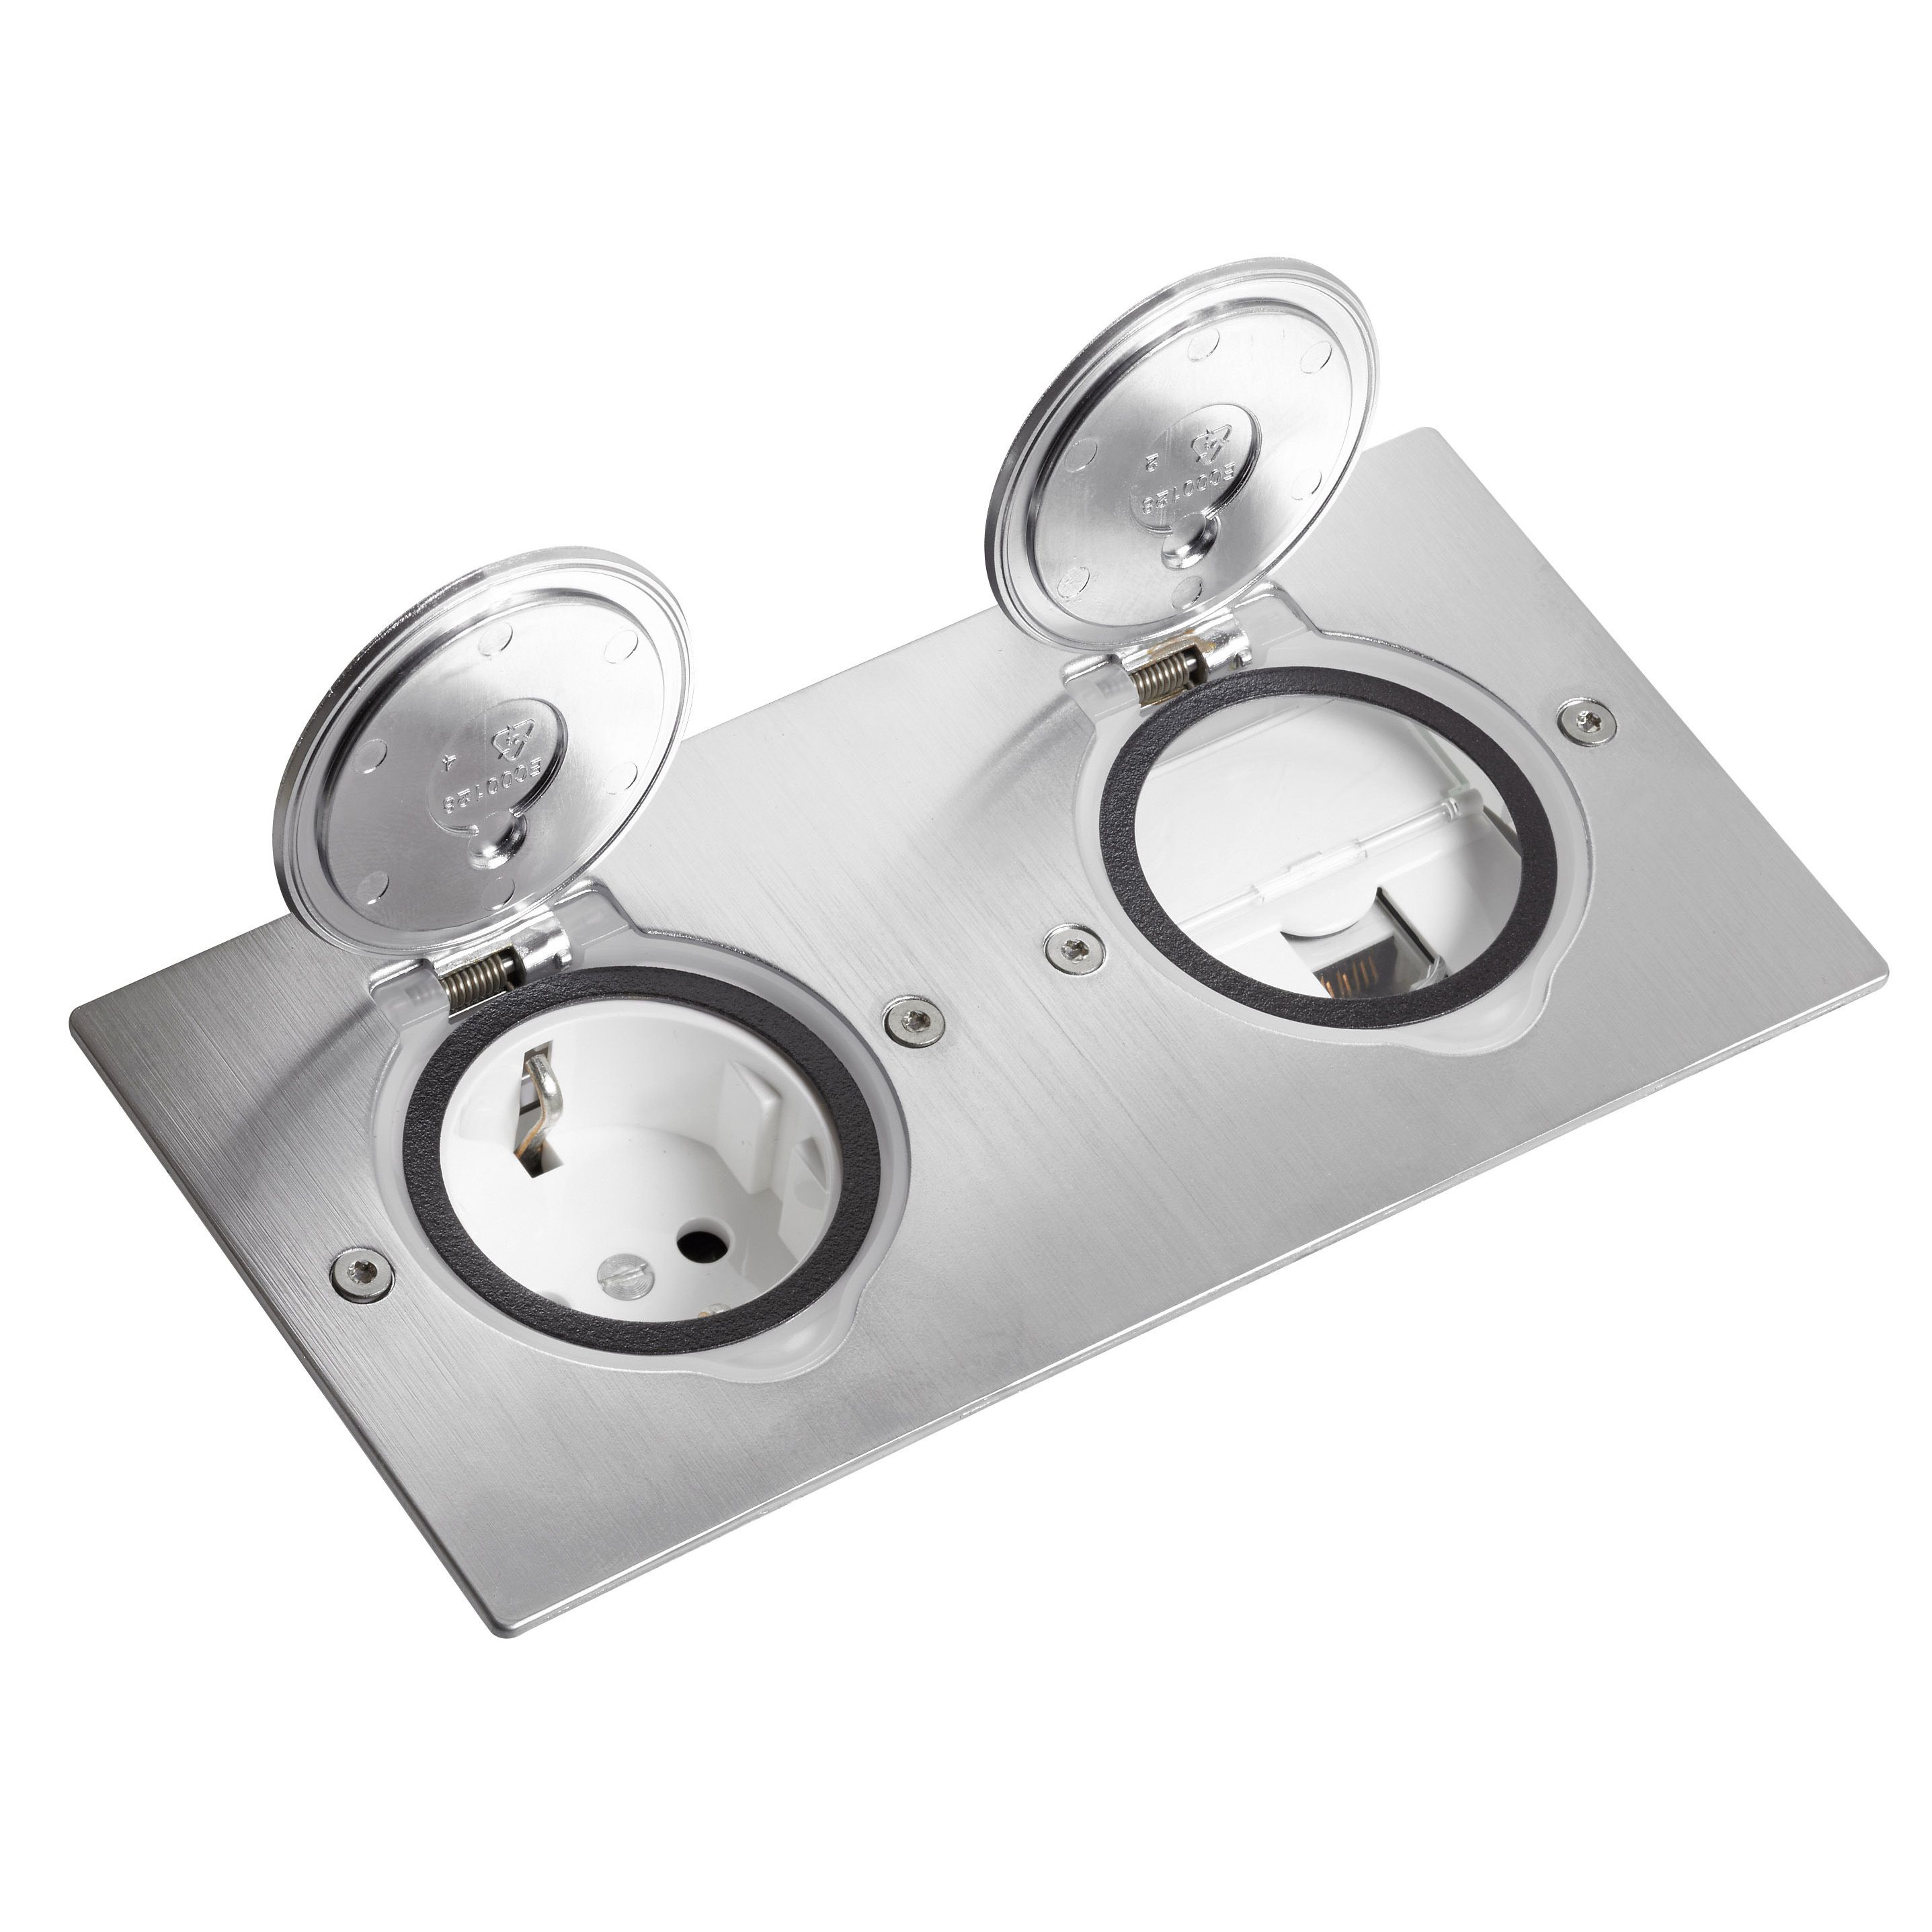 FLOOR RECTANGULAR DOUBLE GANG RECEPTACLE BRUSHED STAINLESS STEEL